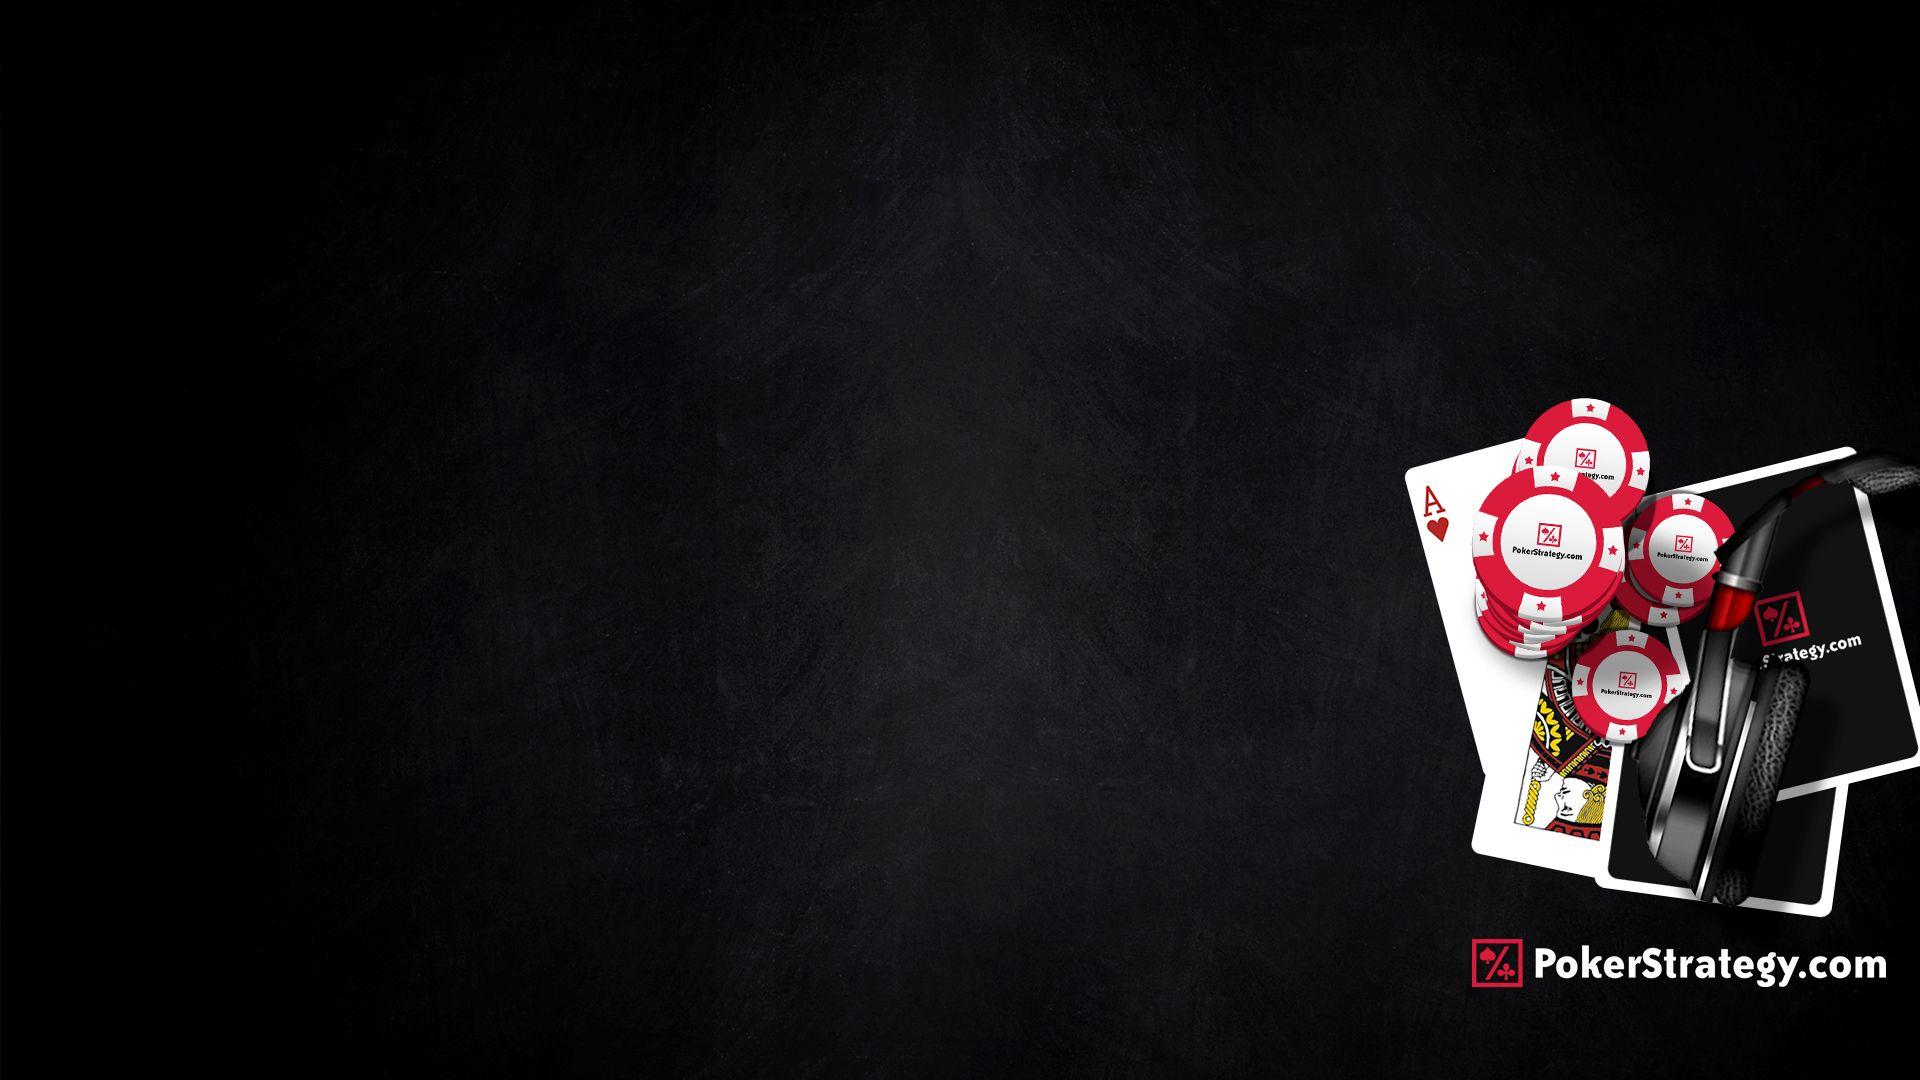 News: Pimp your desktop with our free poker wallpaper